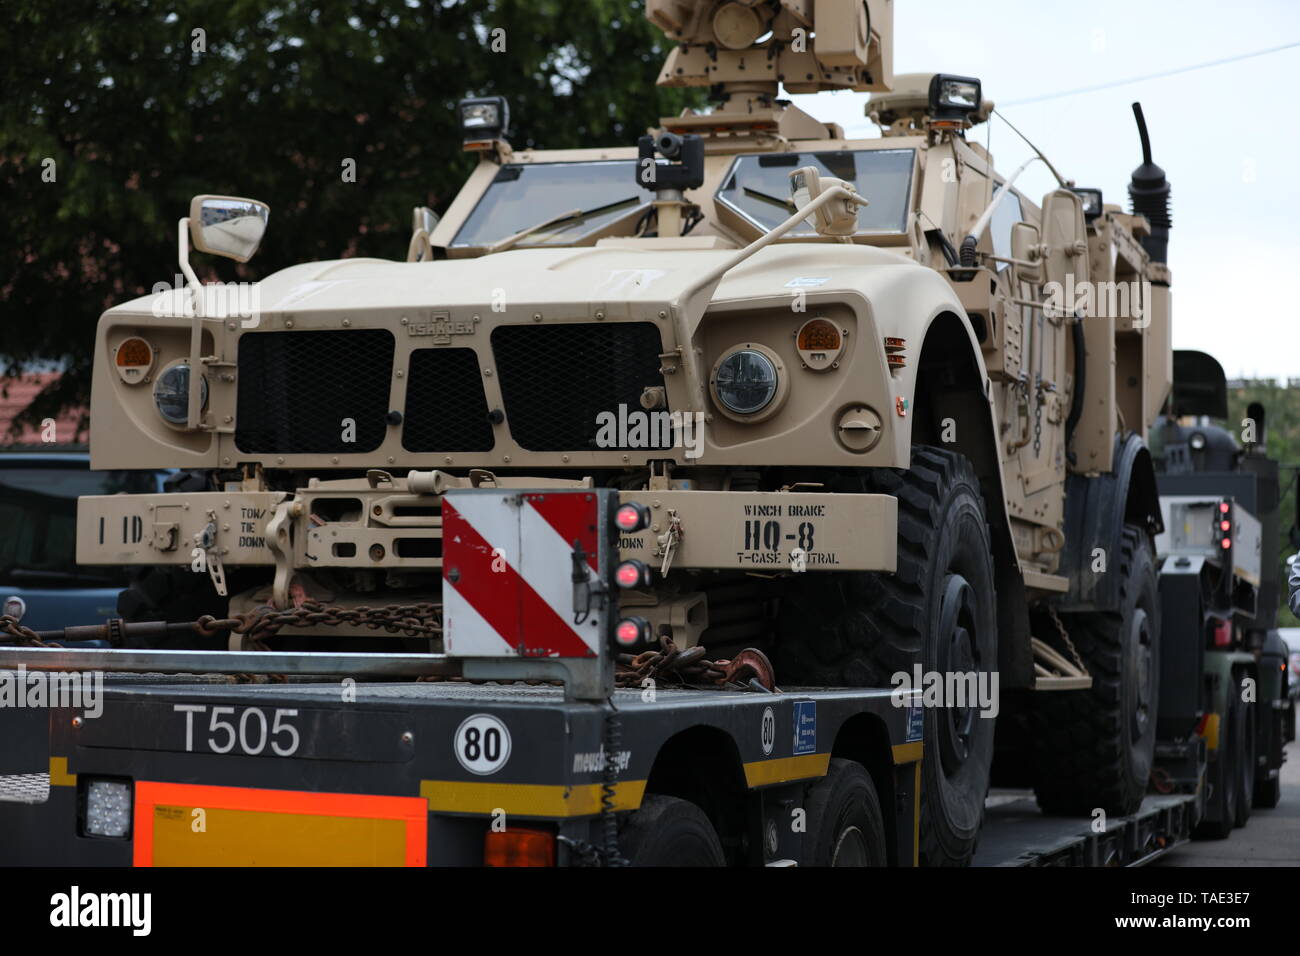 U.S. Soldiers from the Mission Command Element, 1st Infantry Division and Polish transportation contractors load military vehicles to ship throughout Europe in support of Atlantic Resolve in Poznan, Poland, May 23, 2019. The MCE provides division level support to forward deployed Brigades that fall under the “Big Red 1” throughout Europe on a 9-month rotational basis. (U.S. Army photo by Sgt. Kyle Larsen) Stock Photo